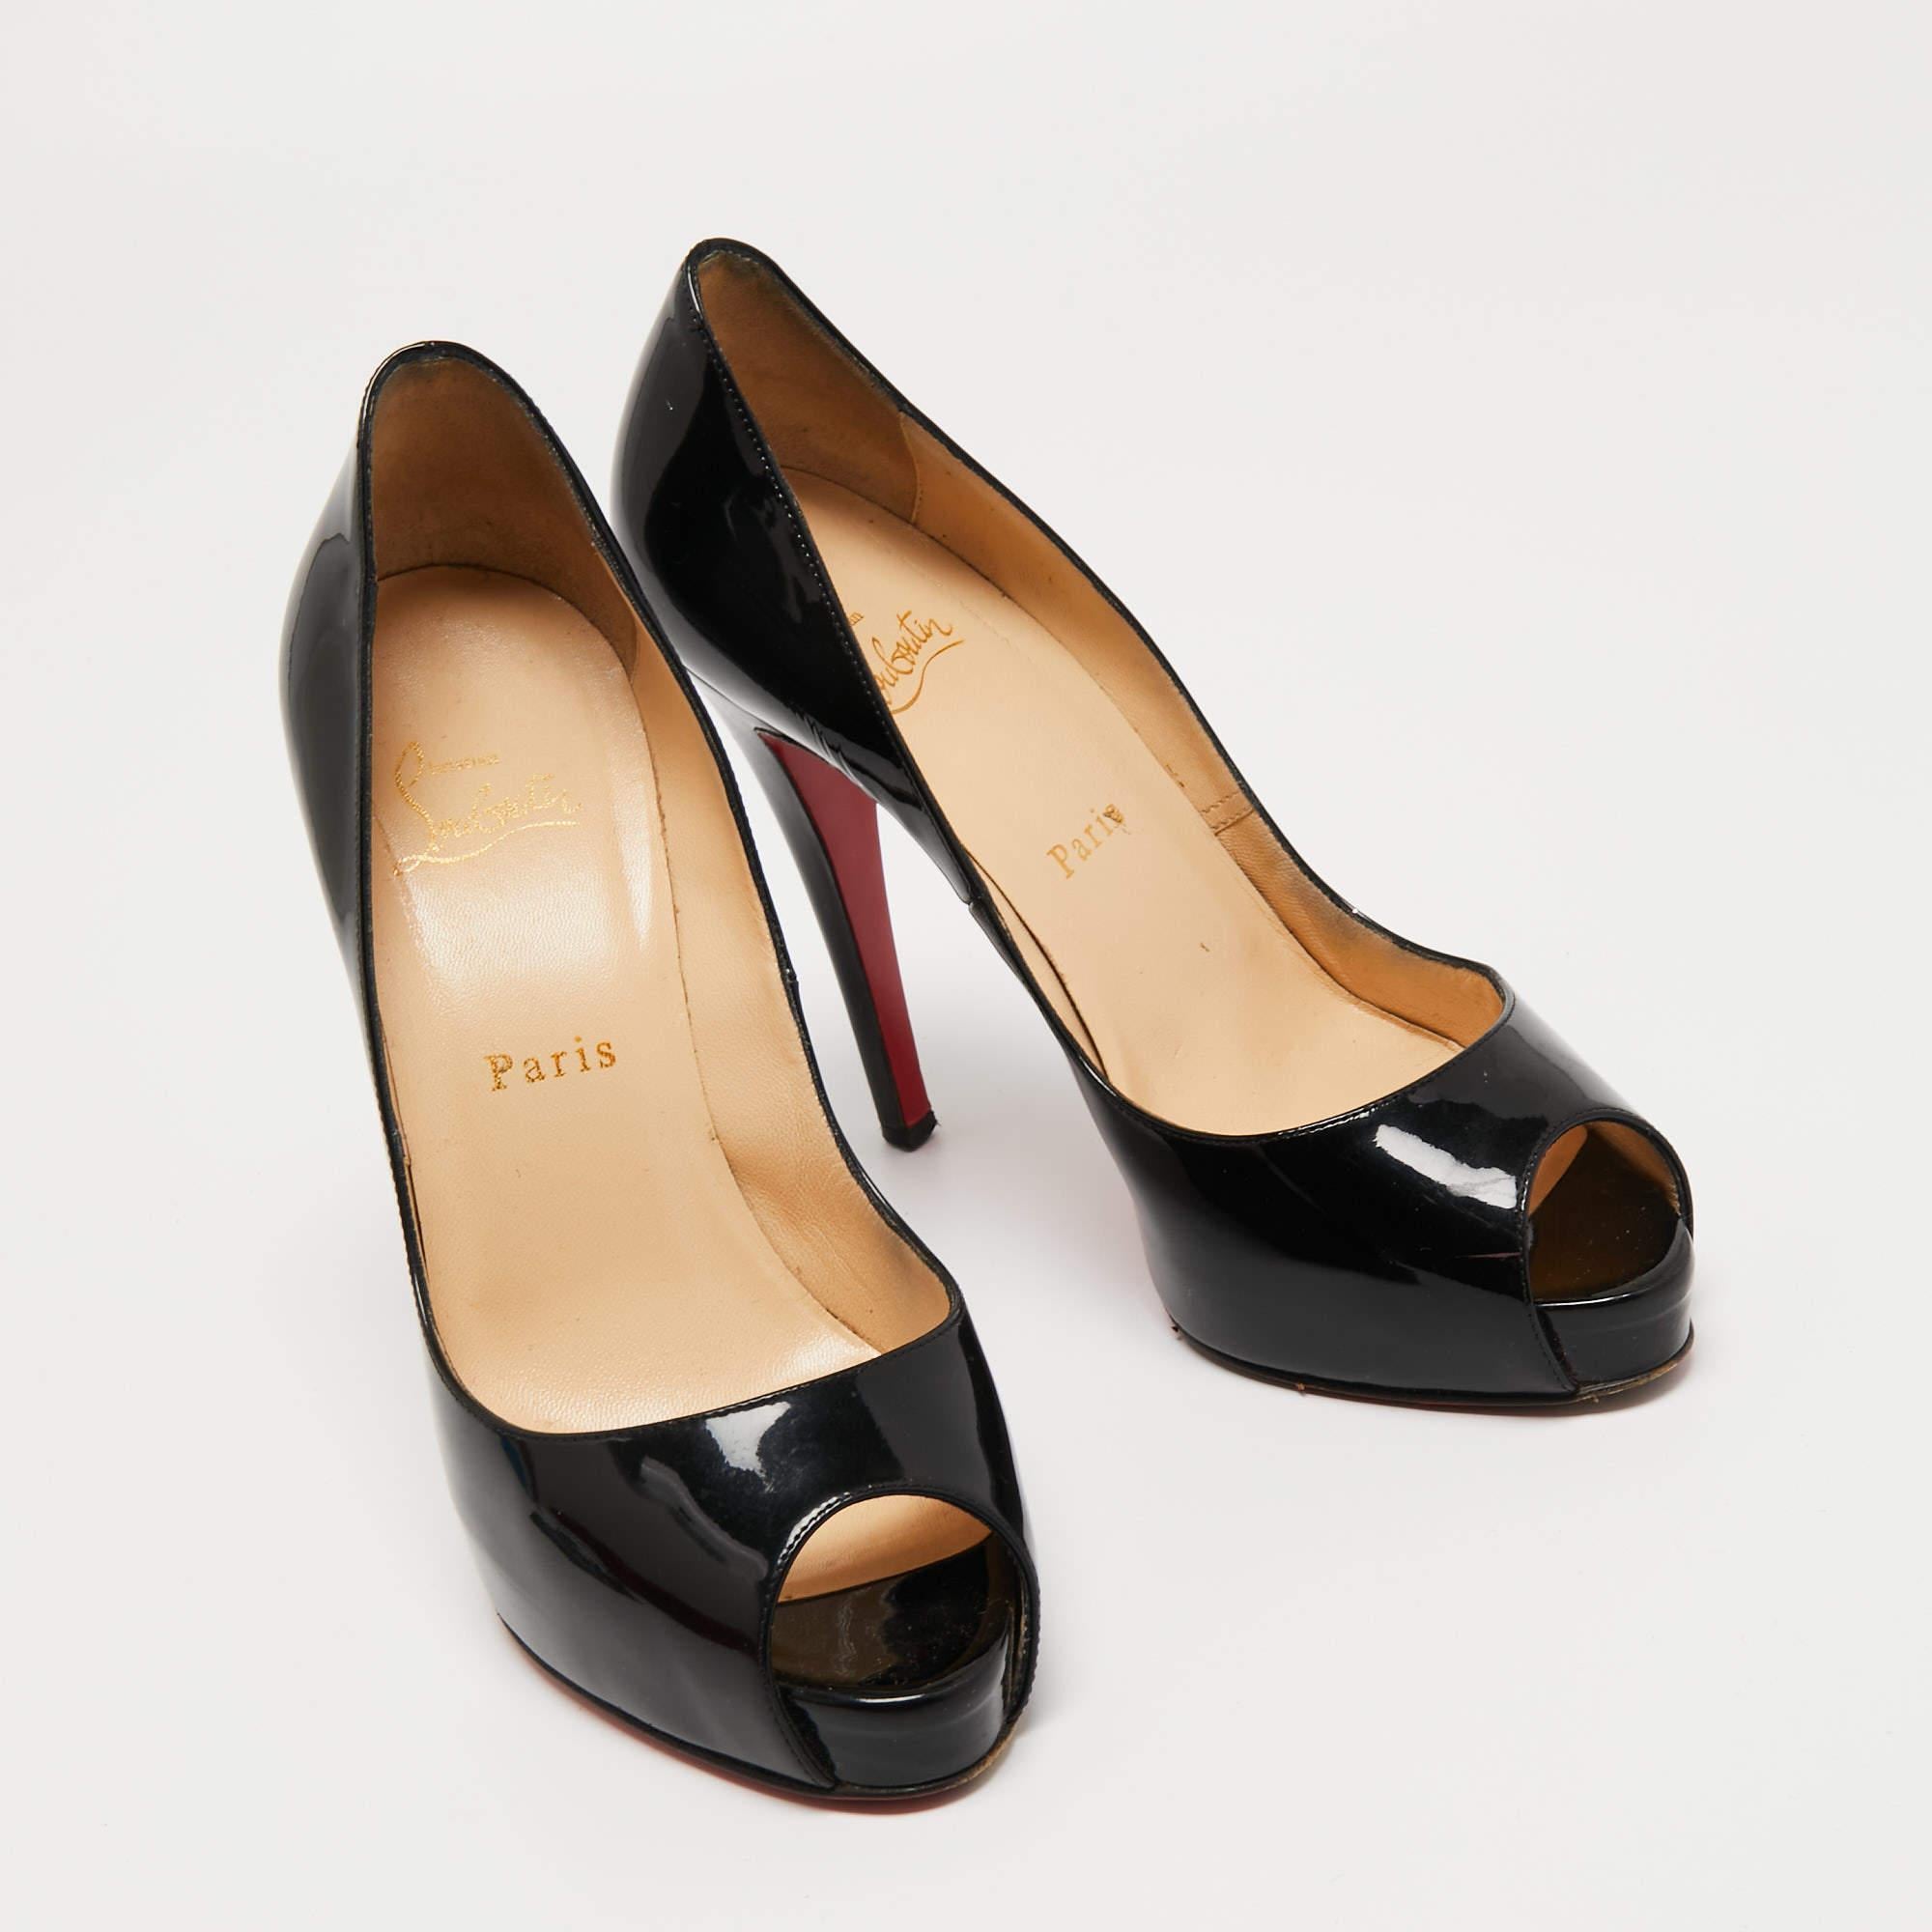 Christian Louboutin Black Patent Leather New Very Prive Pumps Size 38 In Good Condition For Sale In Dubai, Al Qouz 2